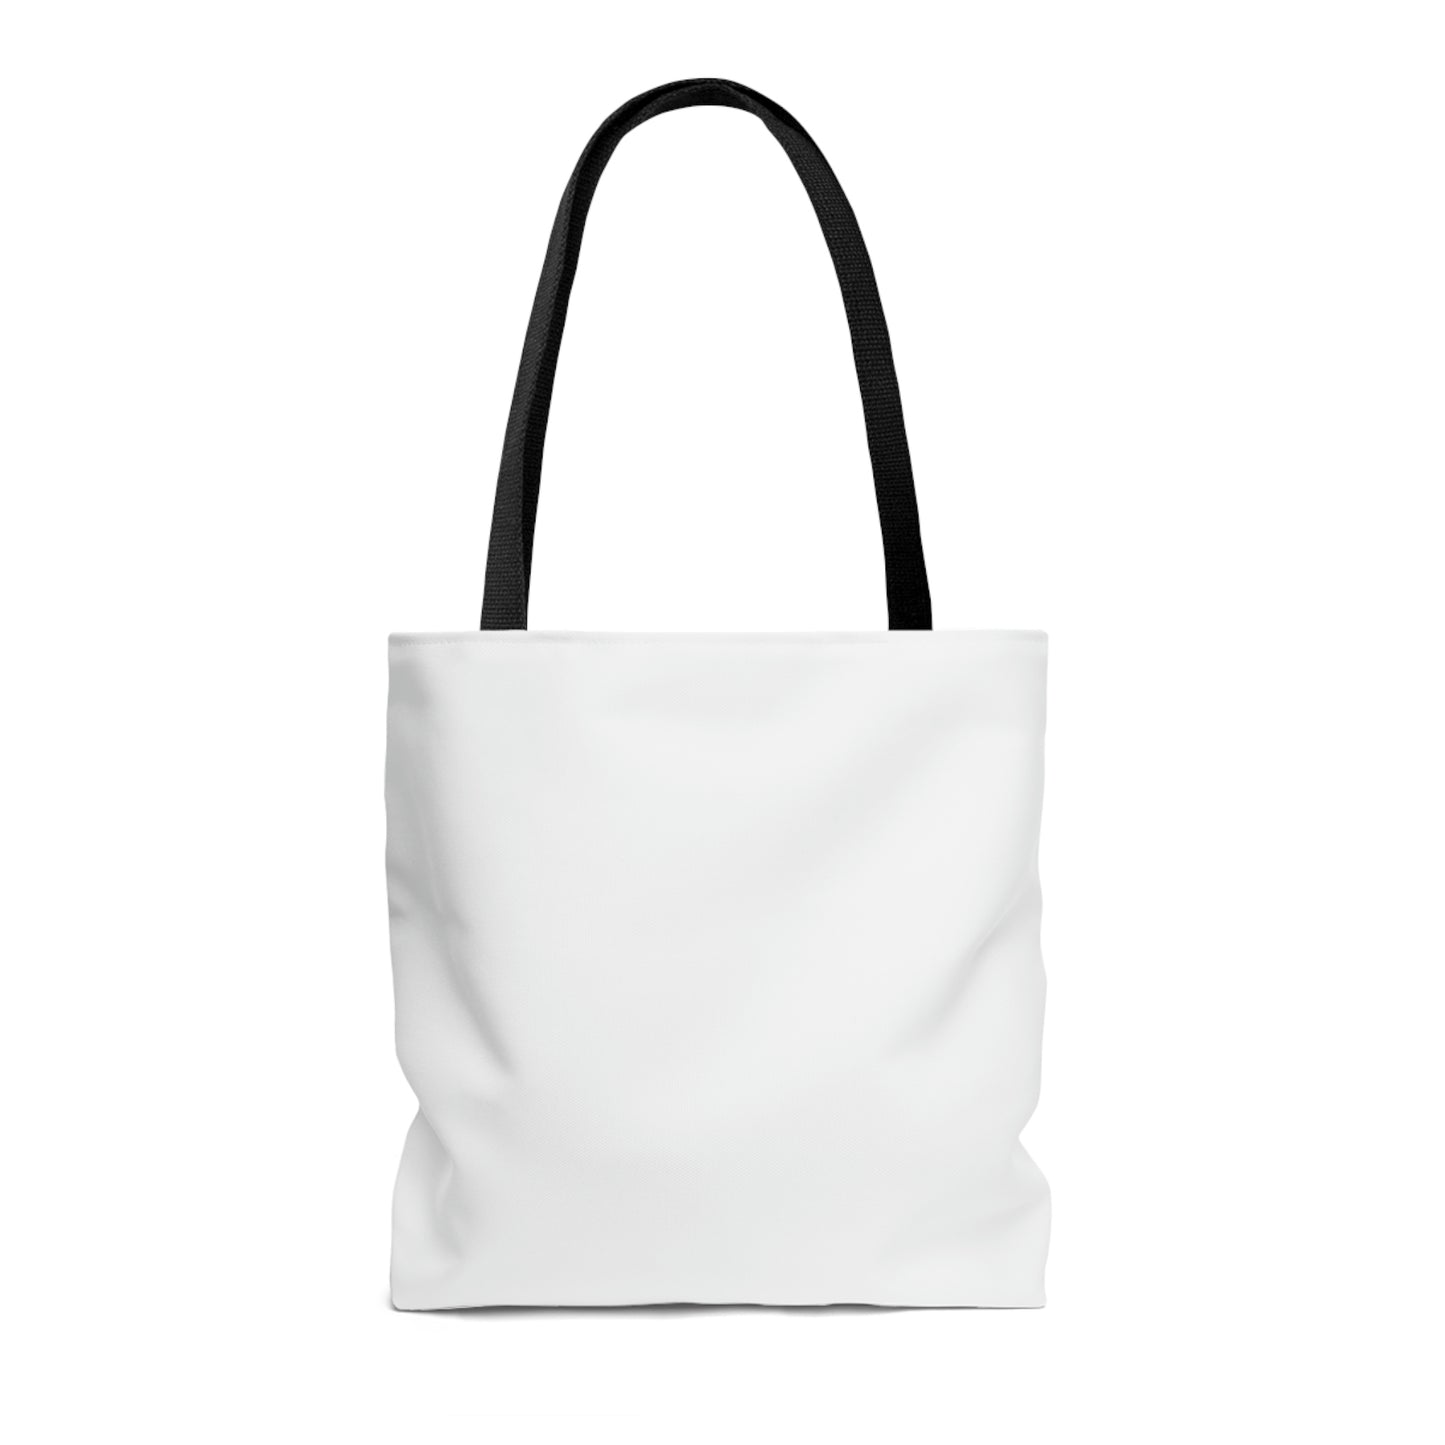 To All The Books Tote Bag